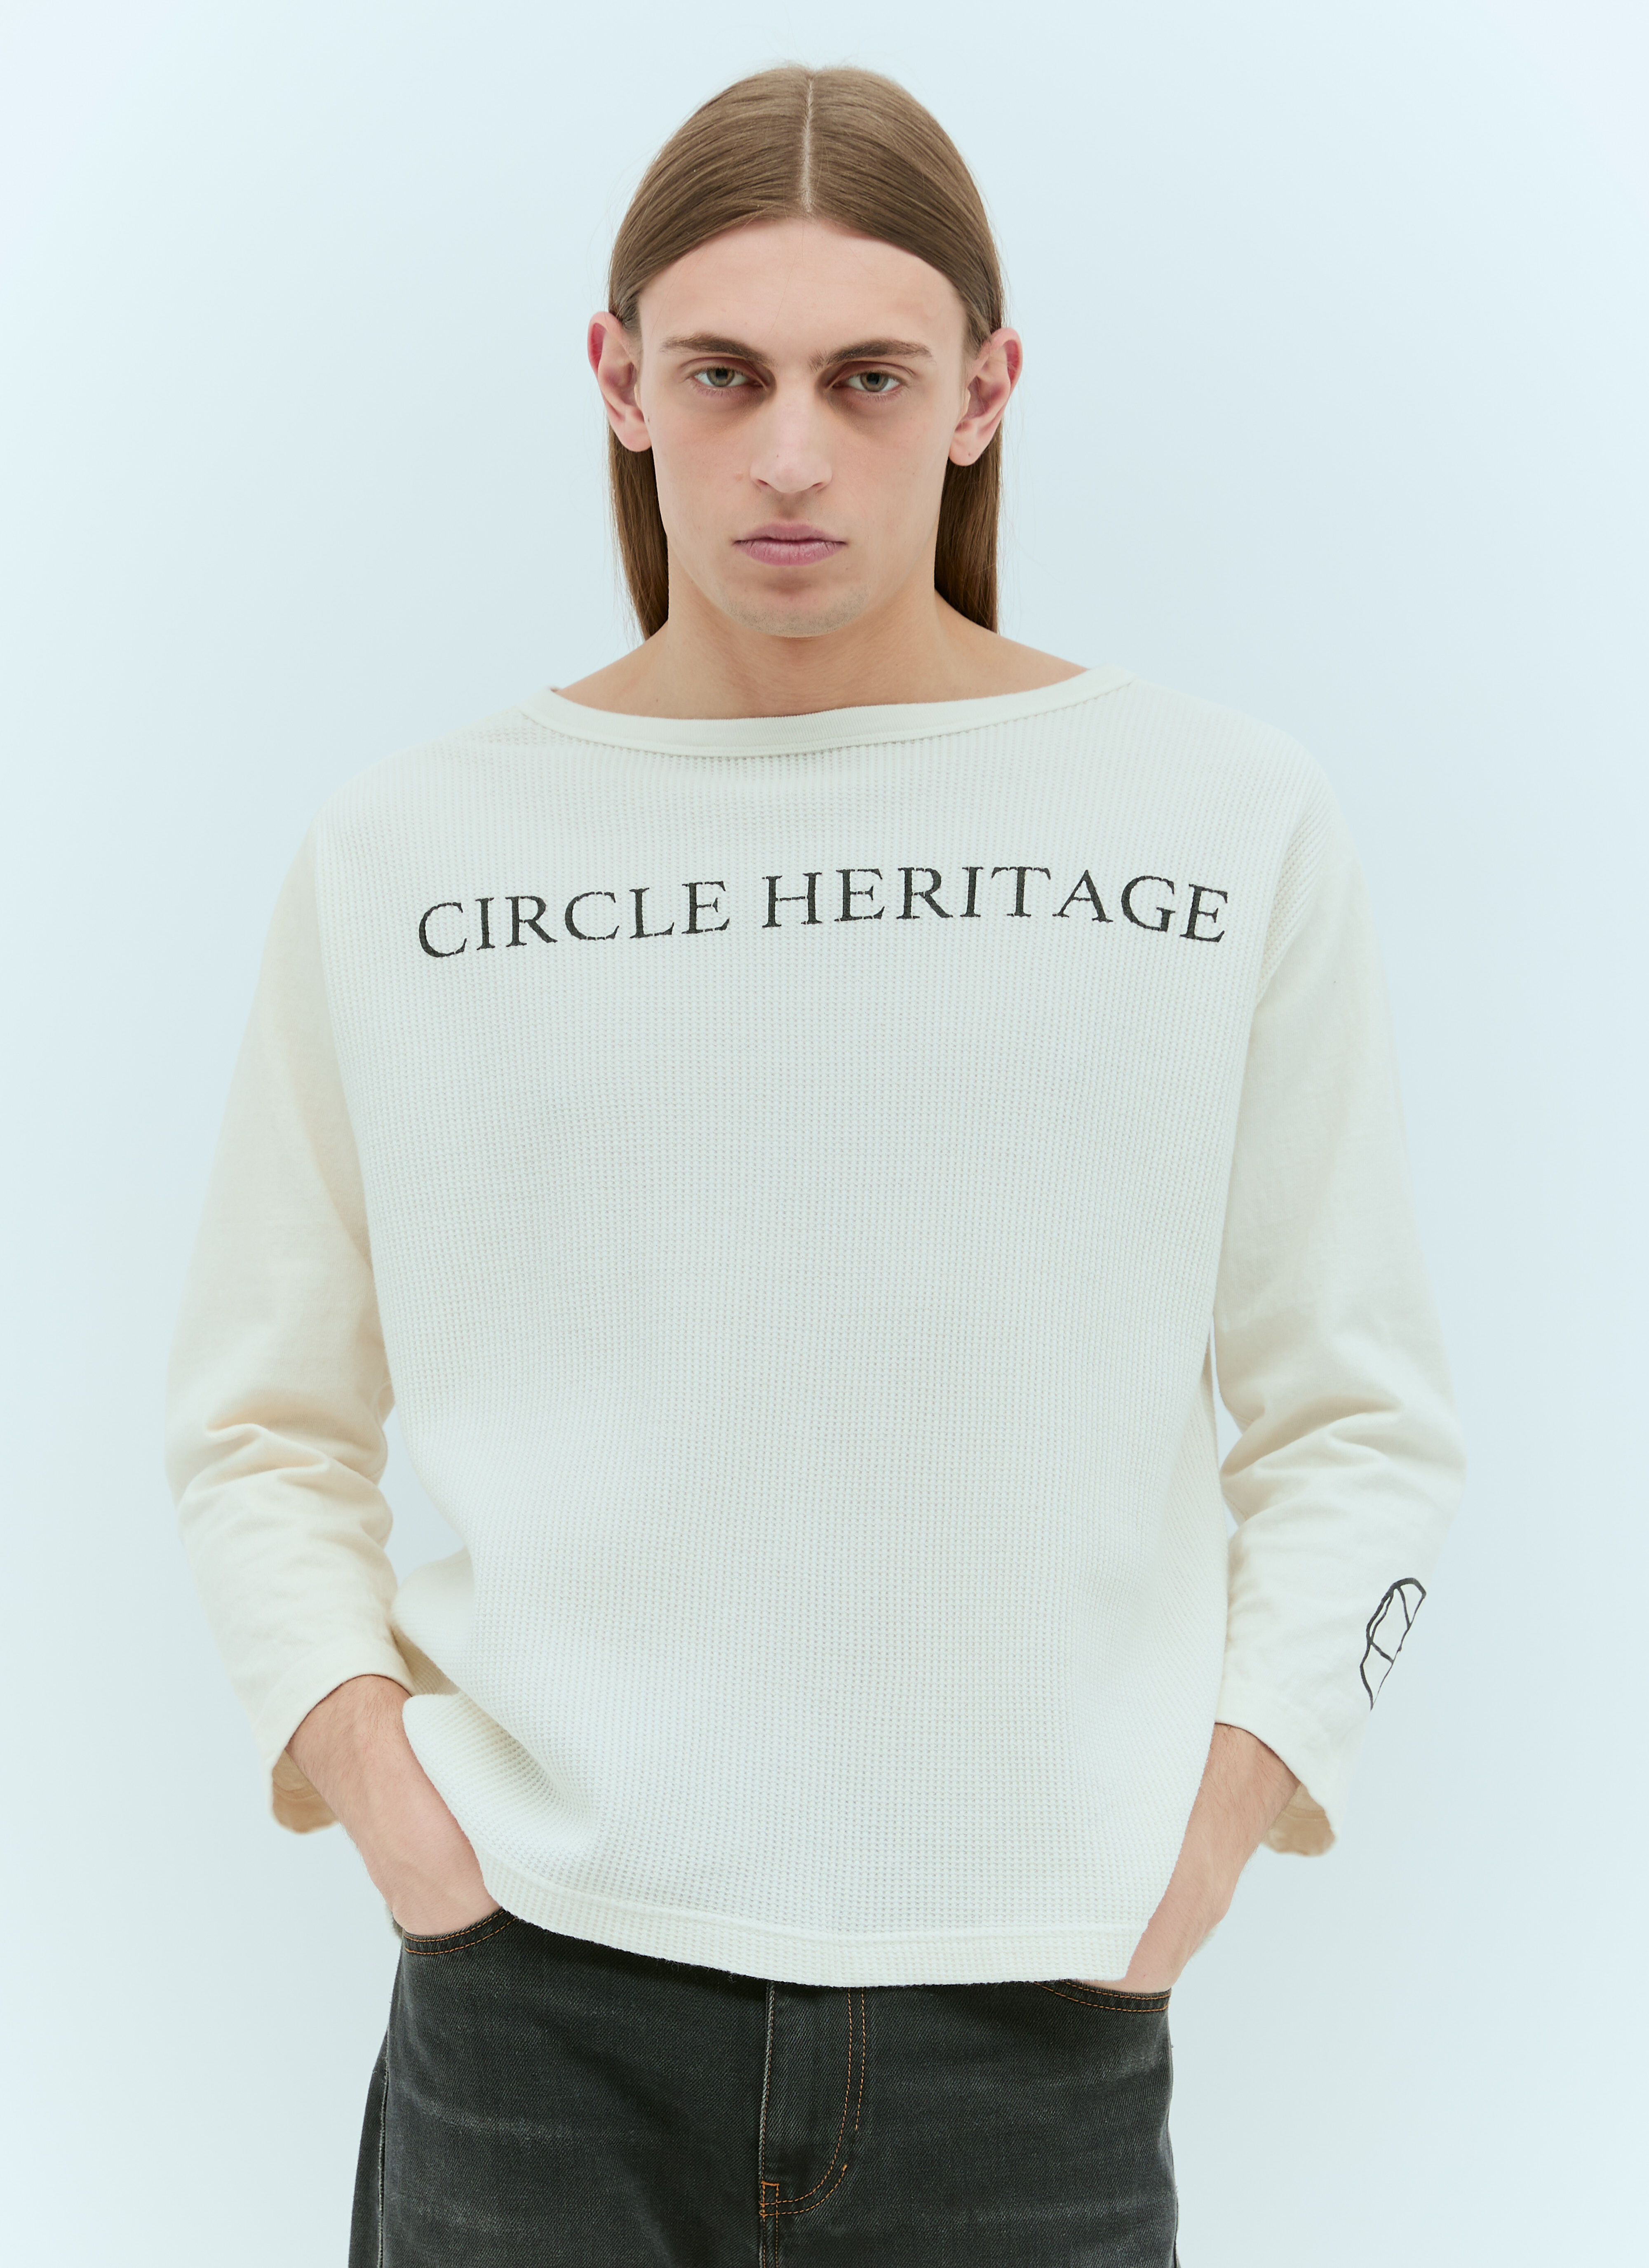 HYSTERIC GLAMOUR x CIRCLE HERITAGE Thermal Long-Sleeve T-Shirt Black hgc0155002